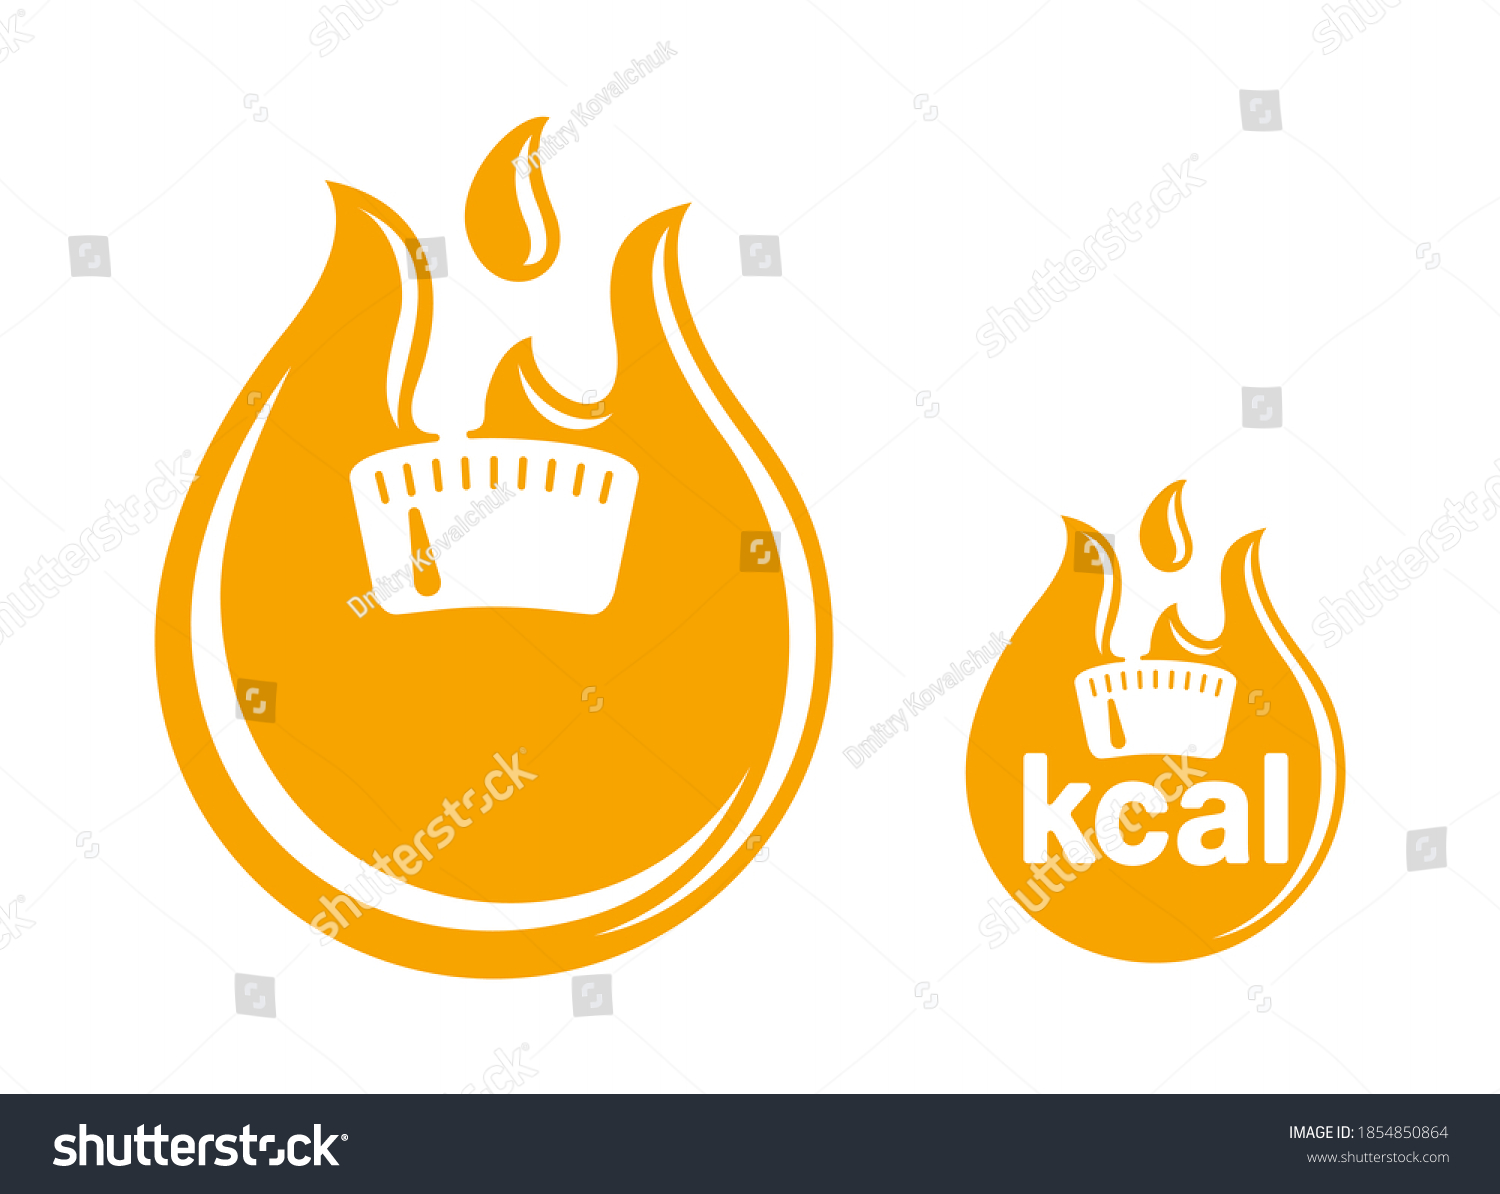 SVG of kcal flat icon (calories sign) combination of flame (fat burning) and weight scales - isolated vector emblem for healthy food, fitness or diet program packaging svg